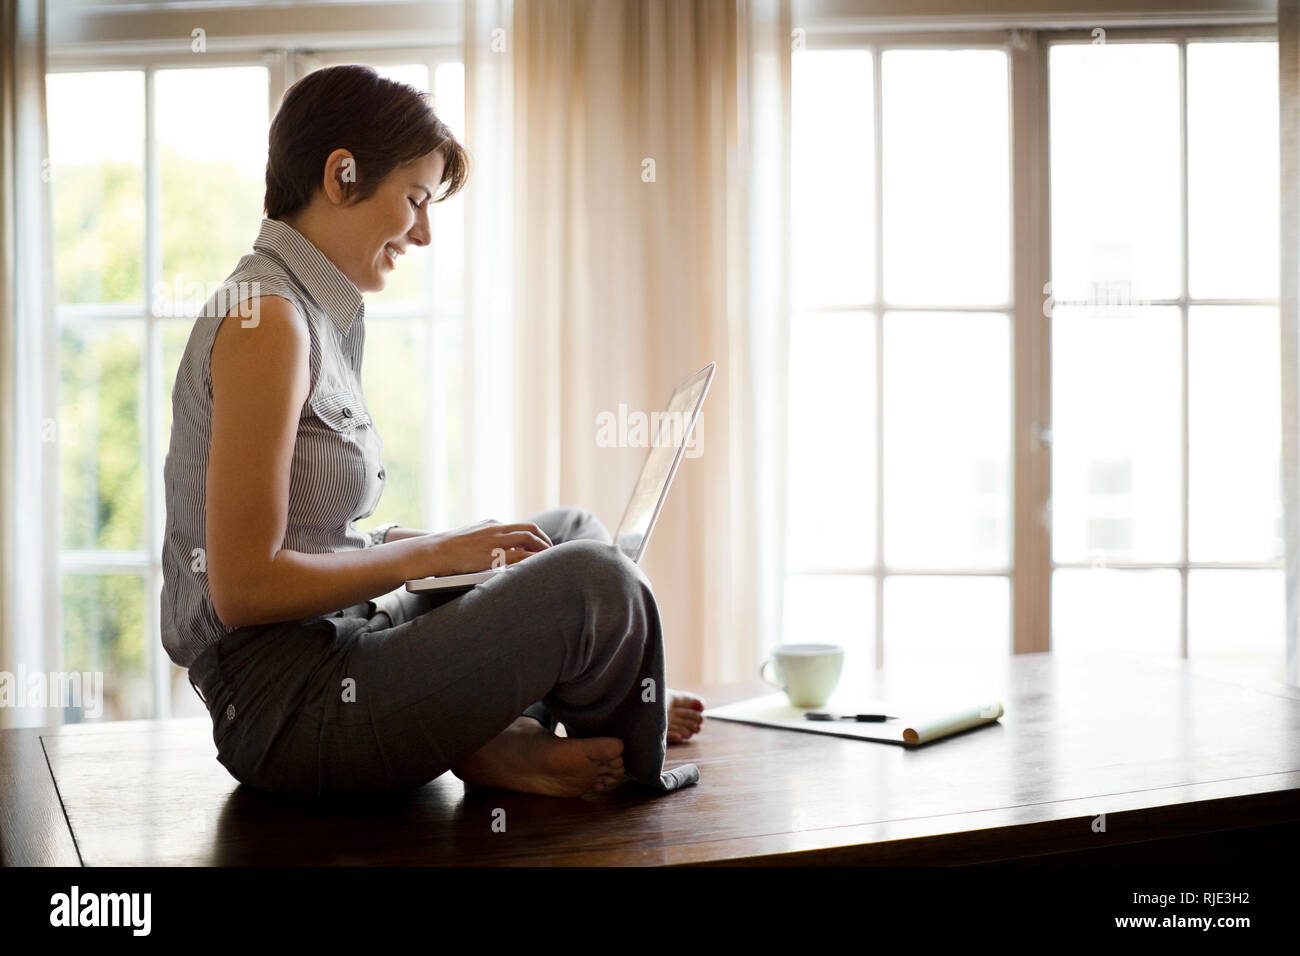 Two happy young women discussing a work project. Stock Photo